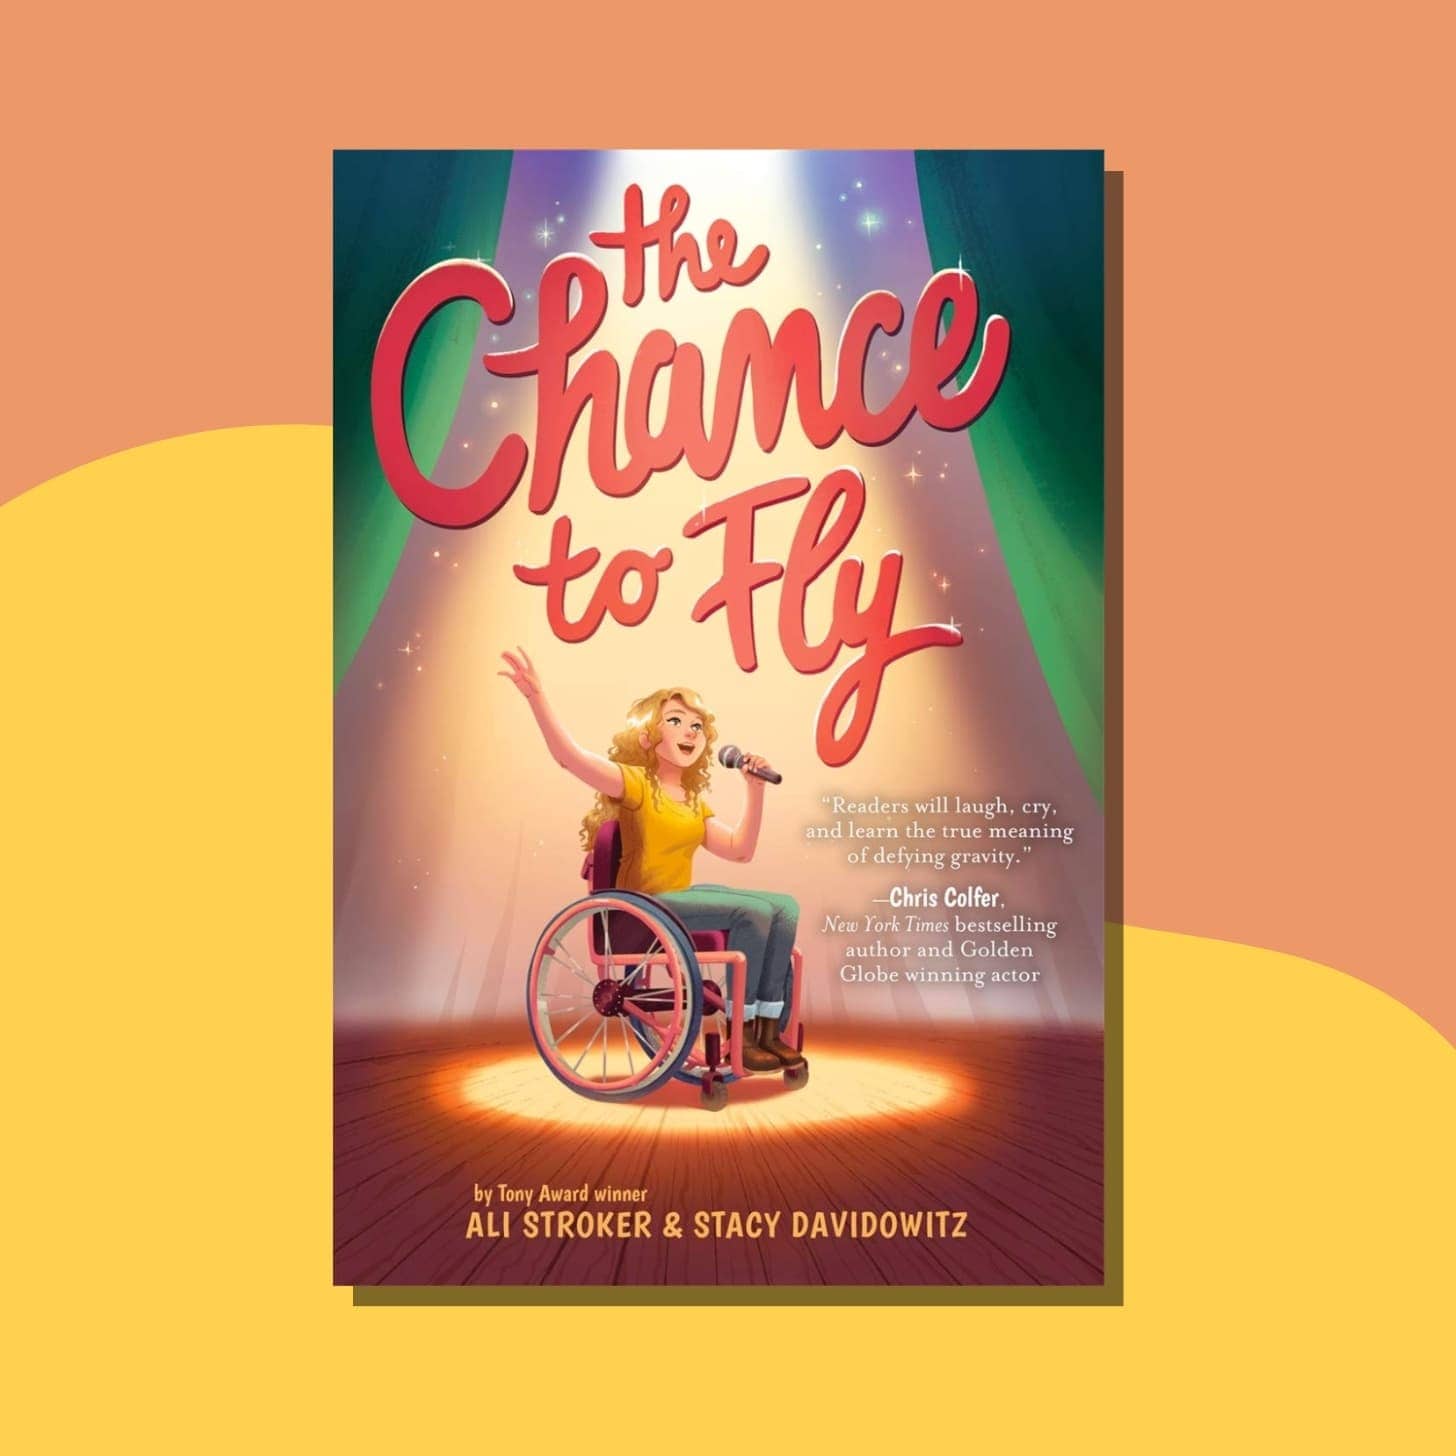 “The Chance to Fly” by Ali Stroker and Stacy Davidowitz - cover shows a stage with a woman singing in a wheelchair